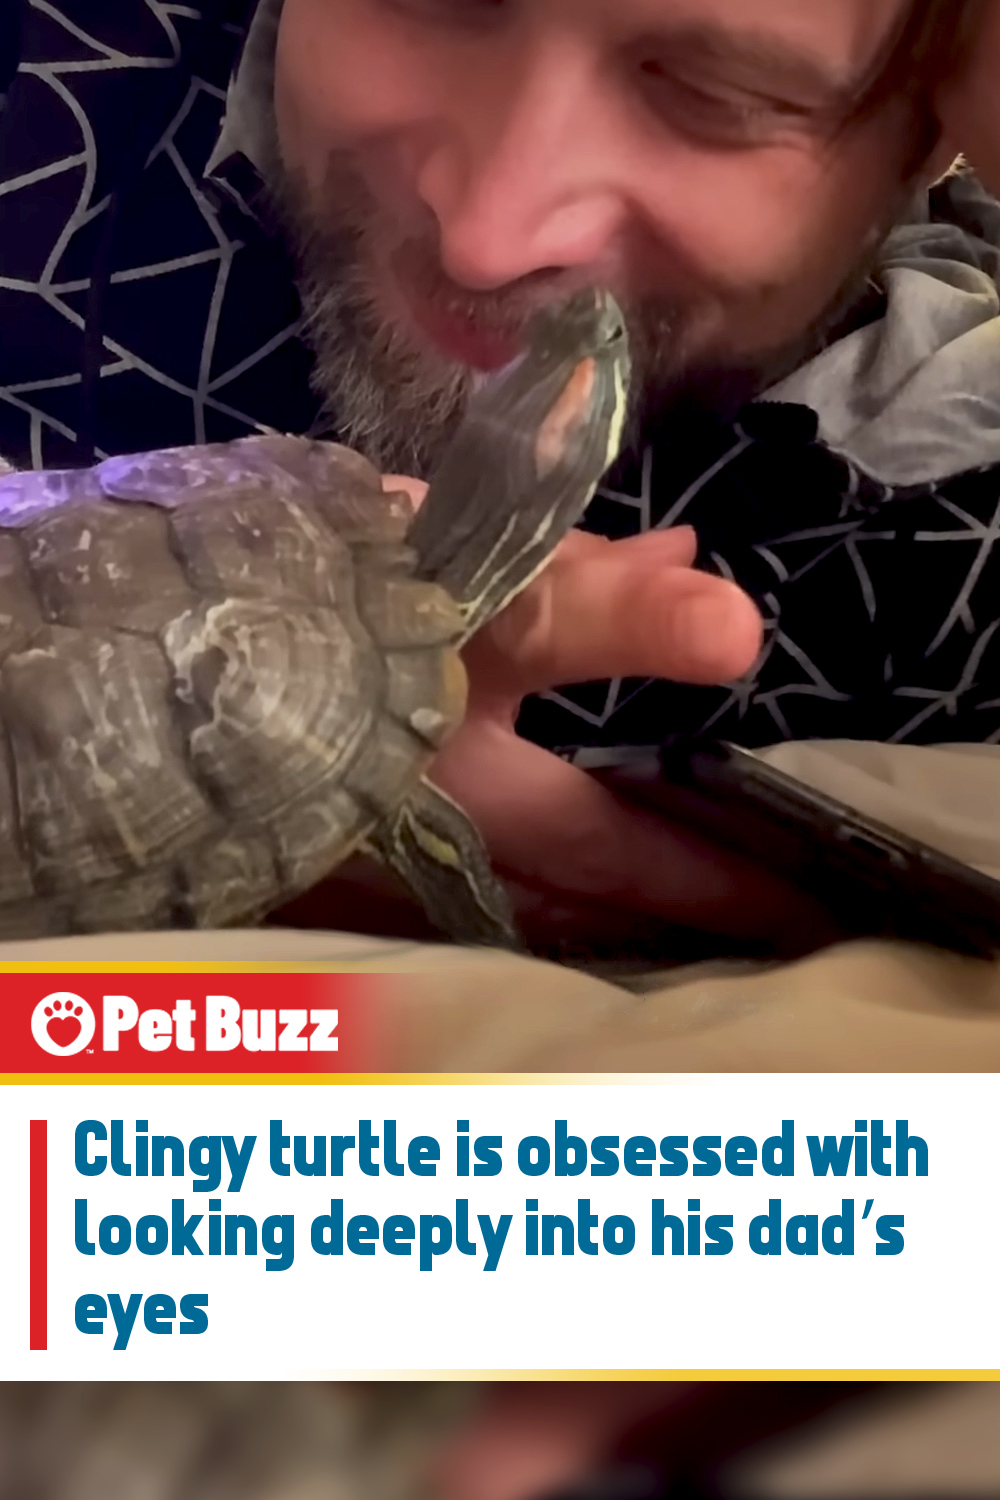 Clingy turtle is obsessed with looking deeply into his dad’s eyes